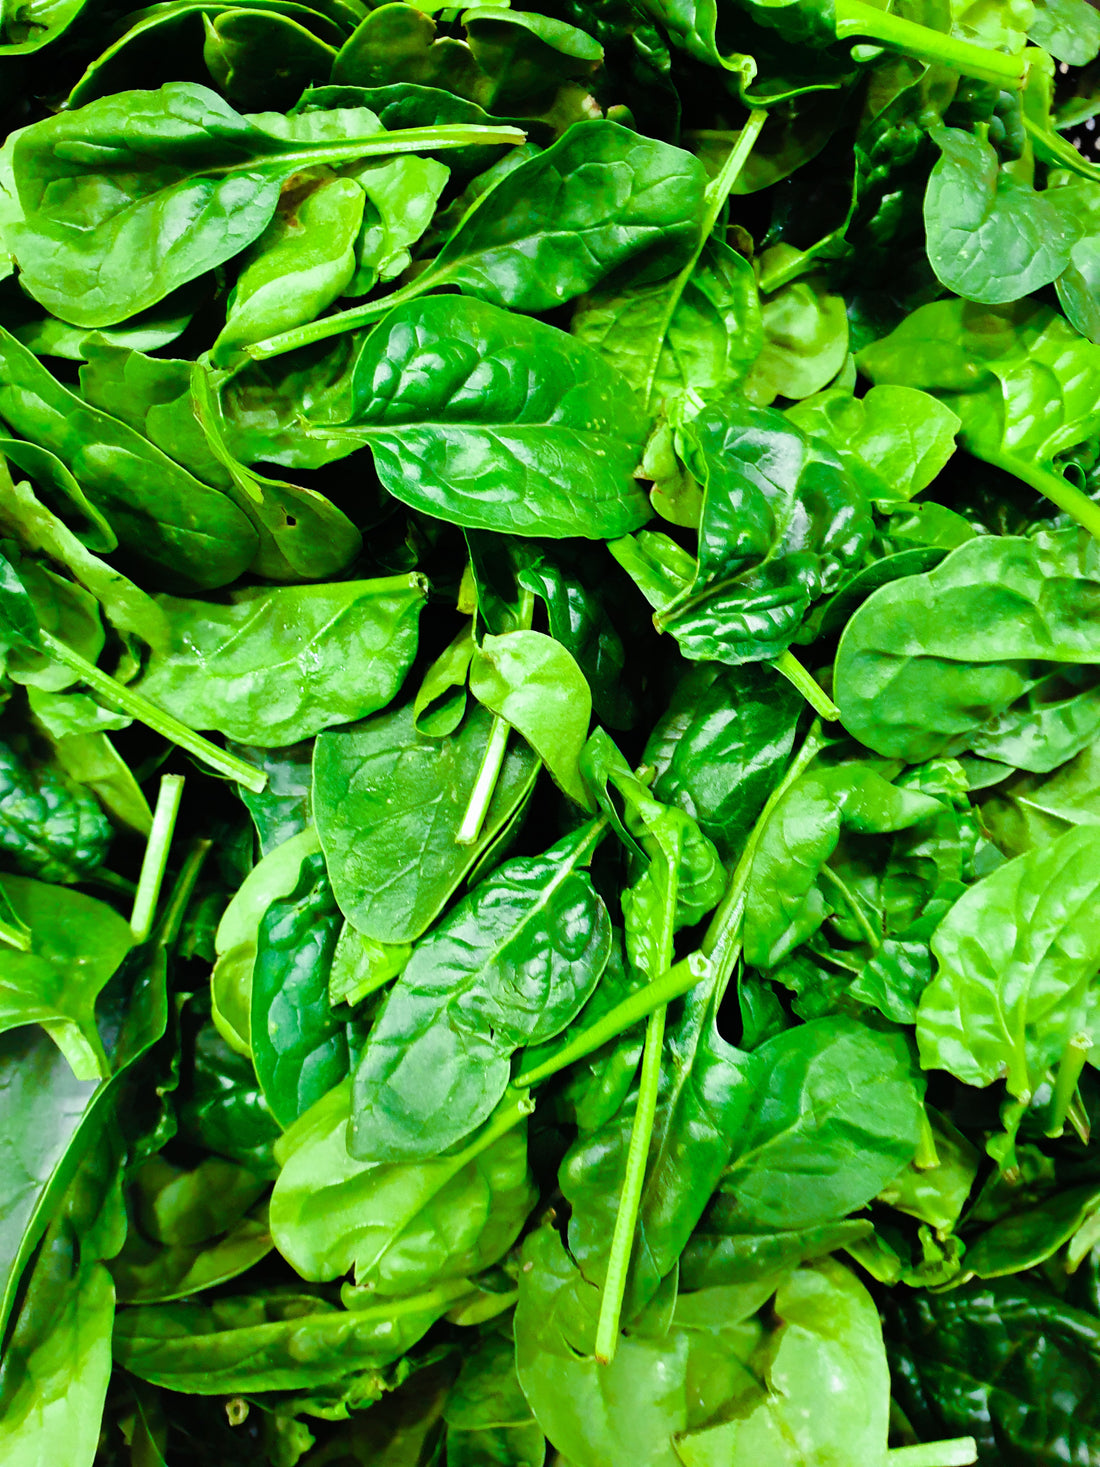 Green Power: Get Strong with Spinach